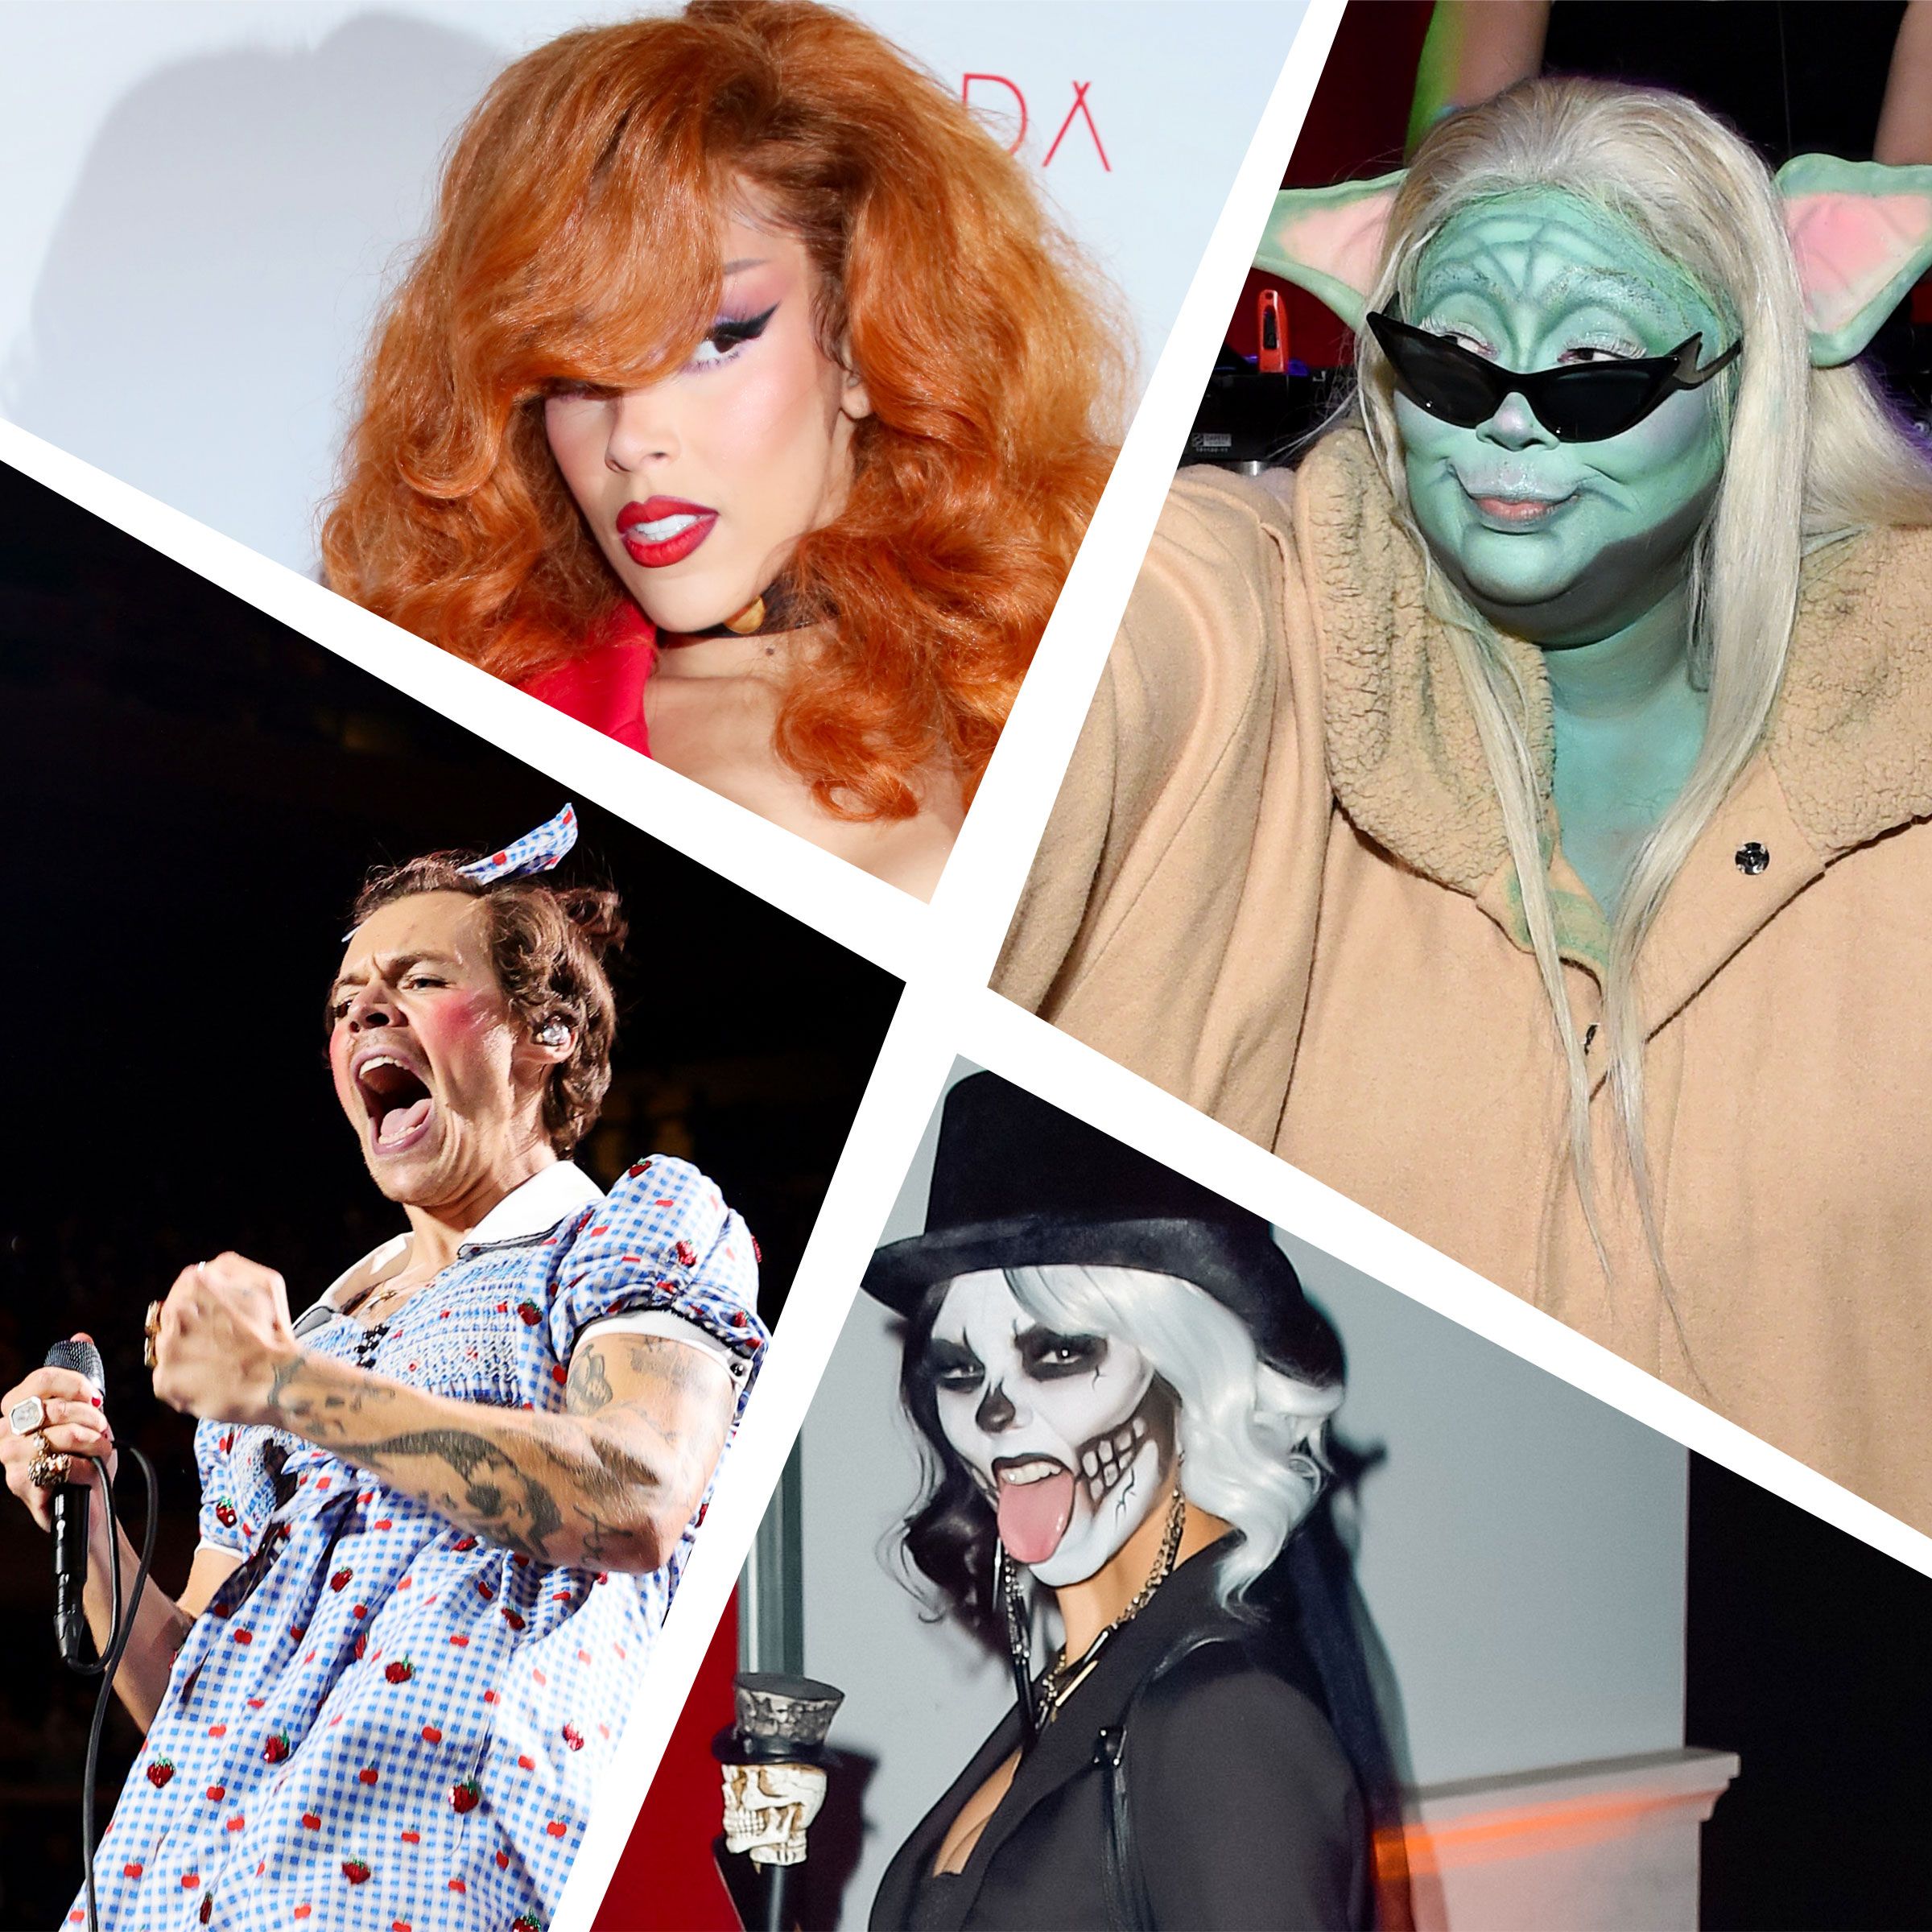 These Celebrities Dressed Up As Other Celebrities For Halloween 2021